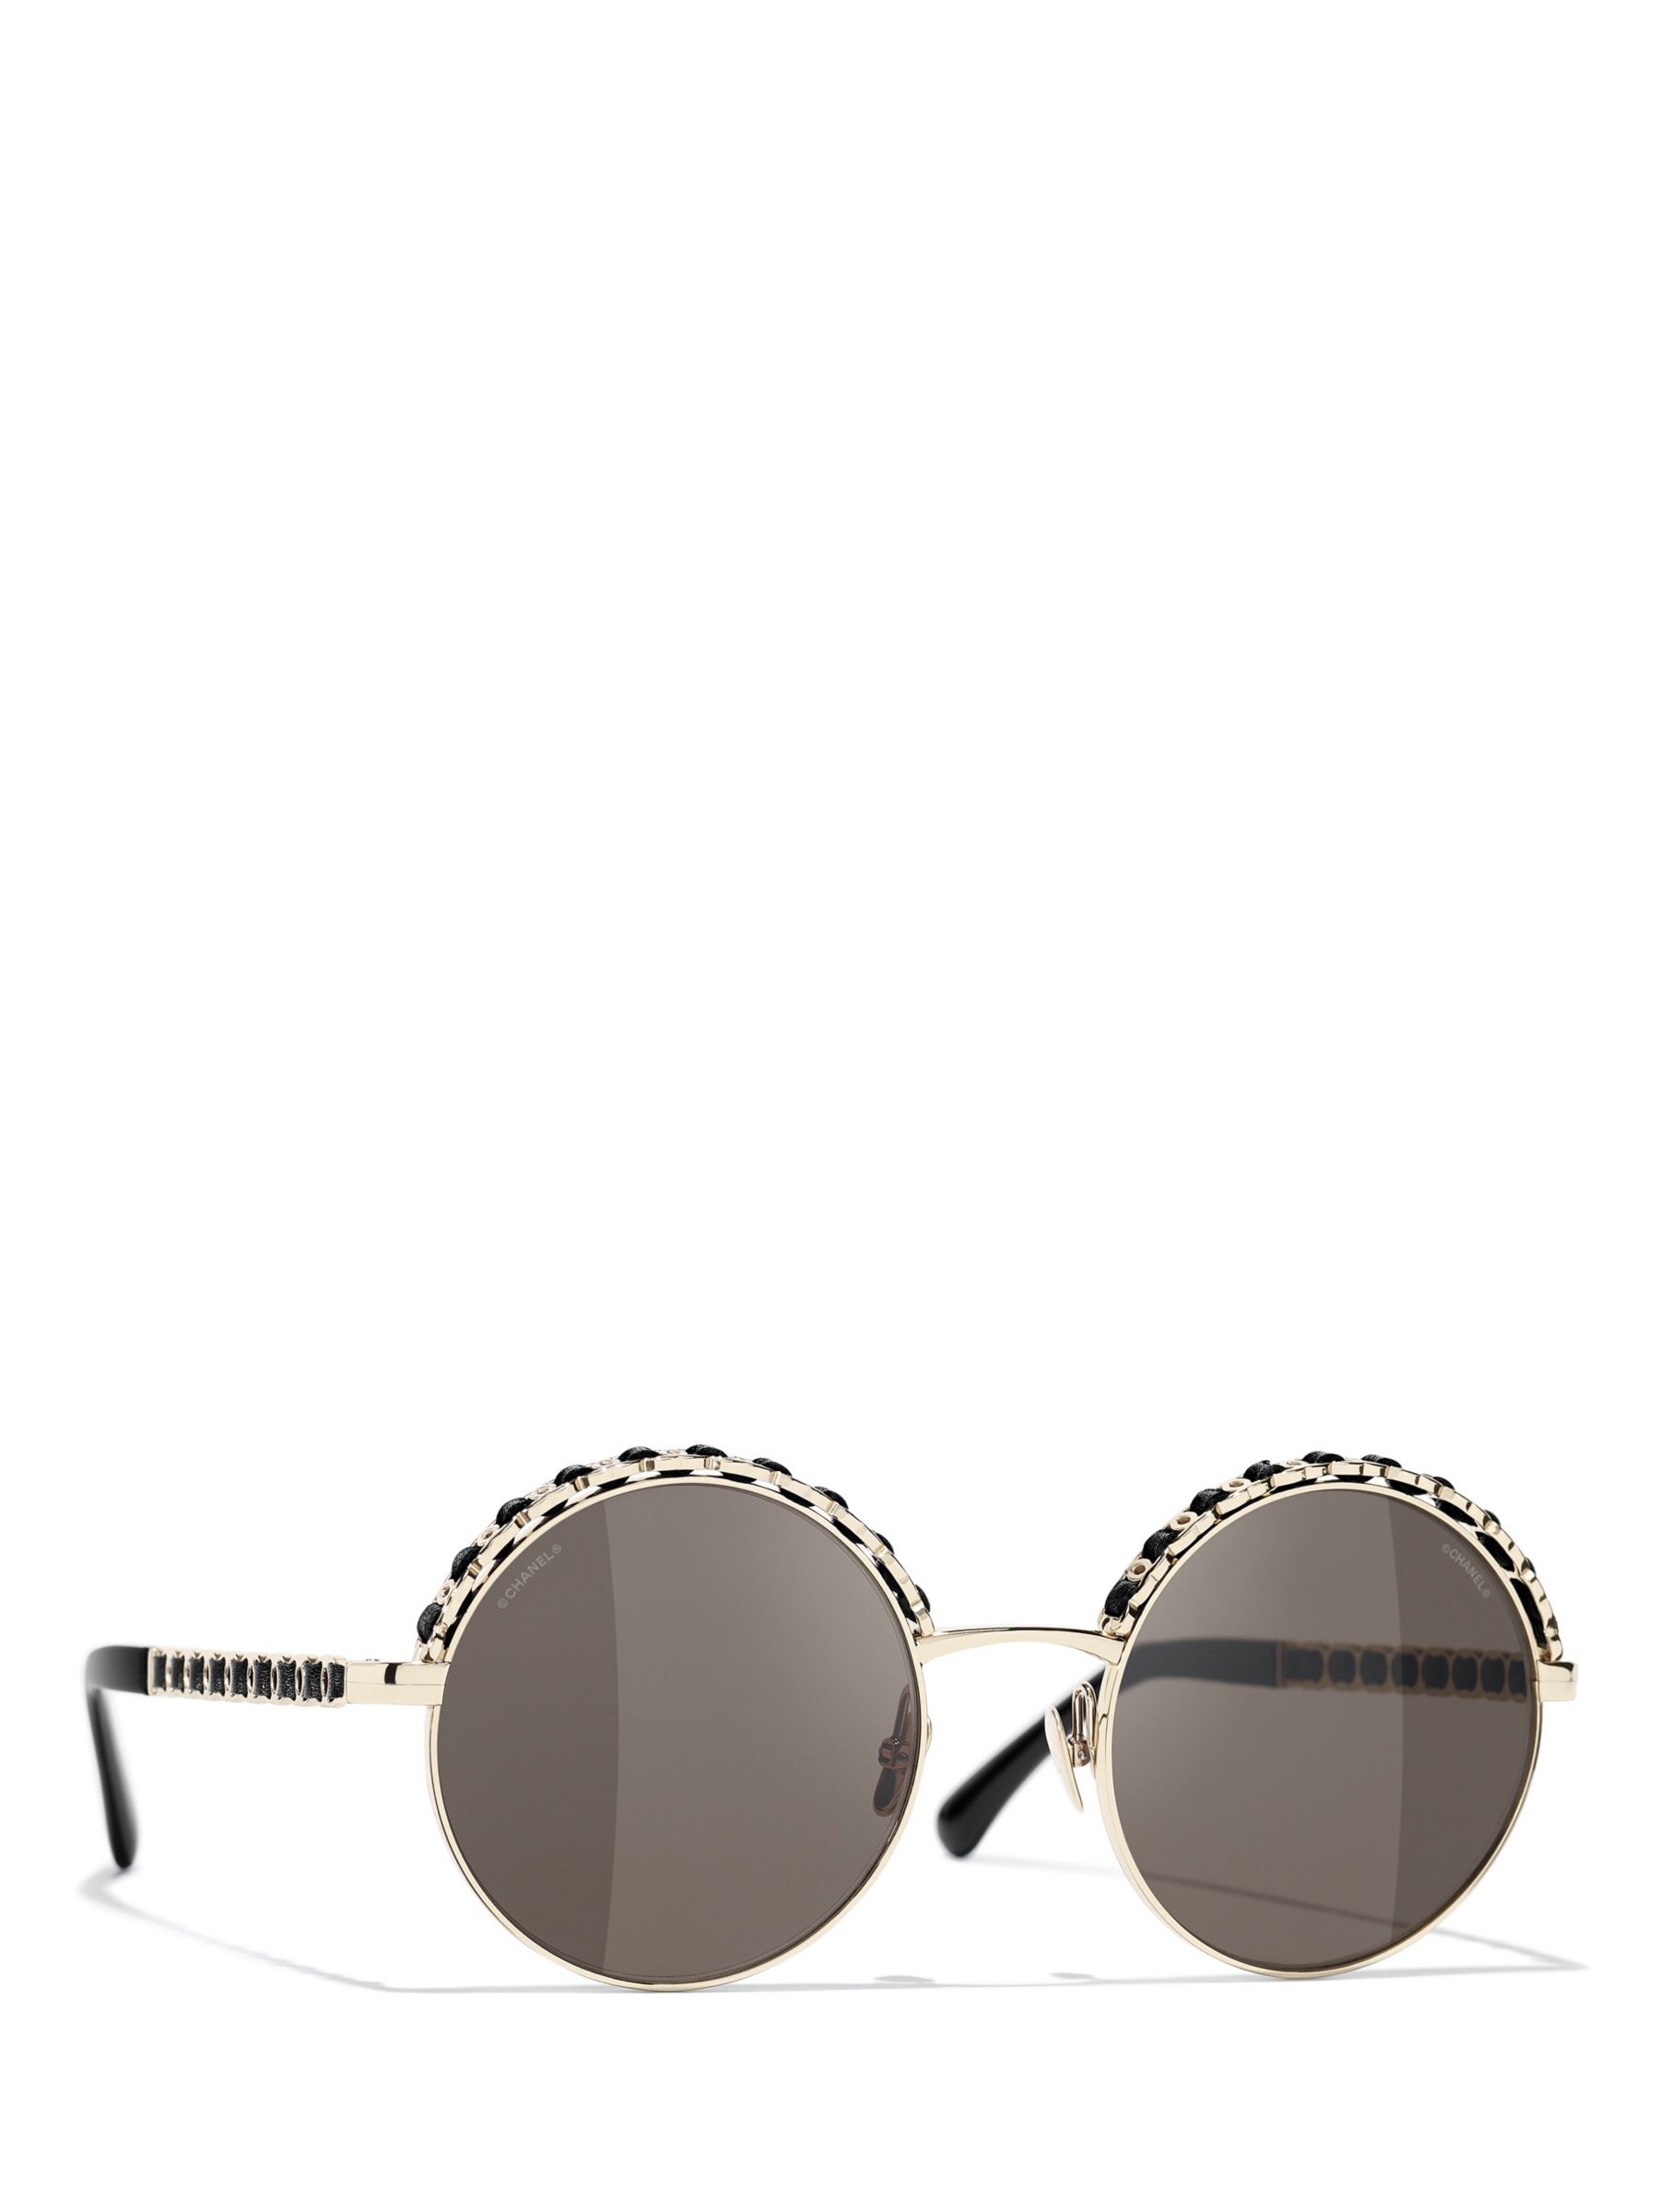 CHANEL Round Sunglasses CH4265Q Pale Gold/Grey at John Lewis & Partners